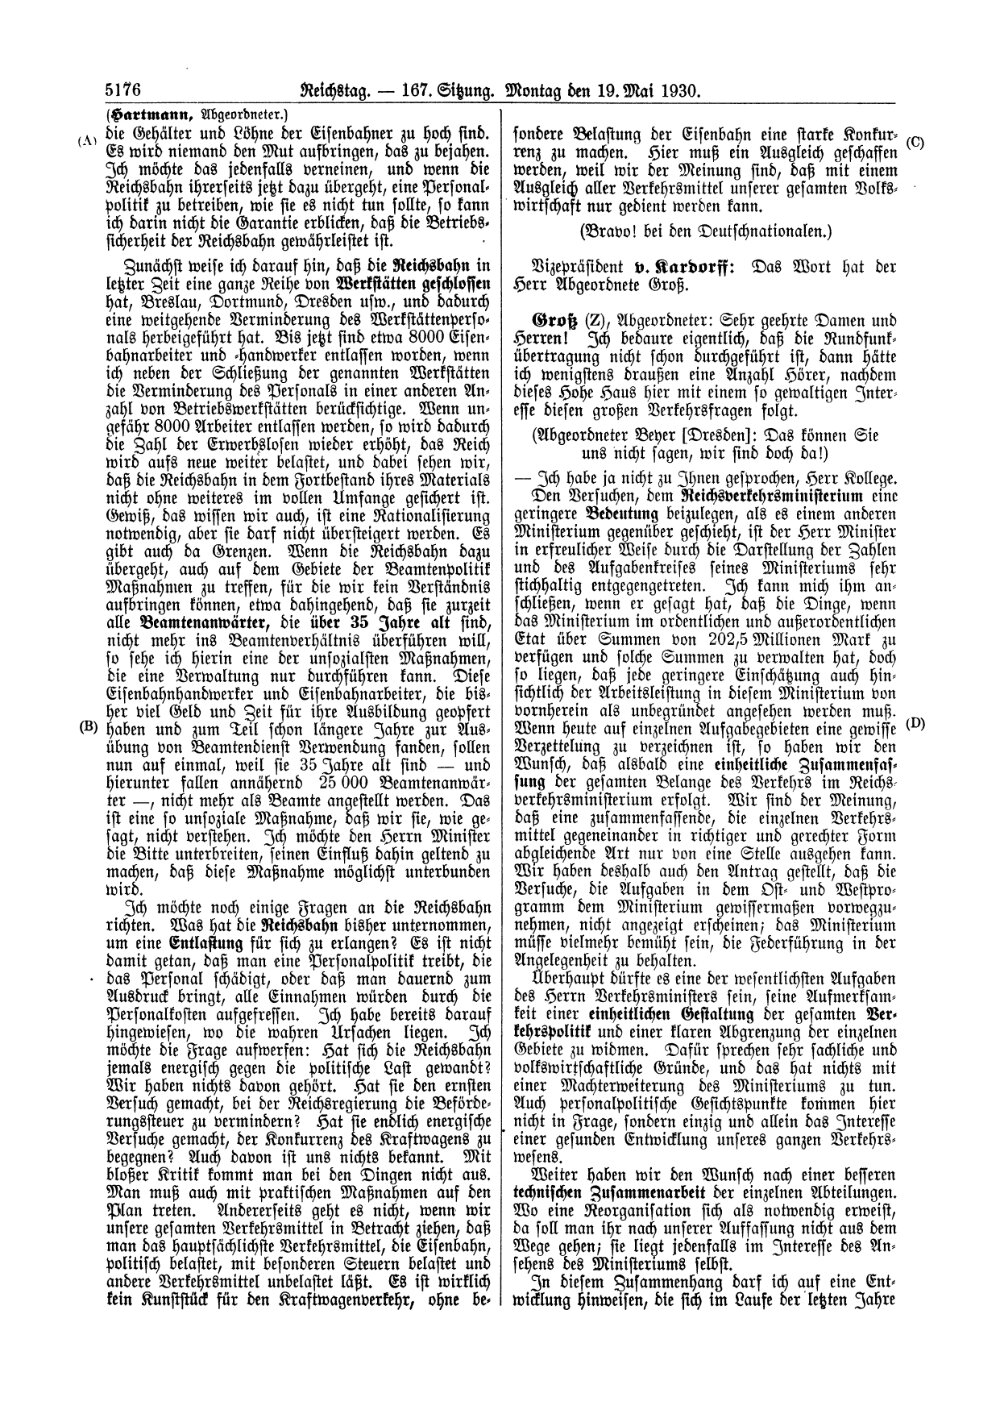 Scan of page 5176